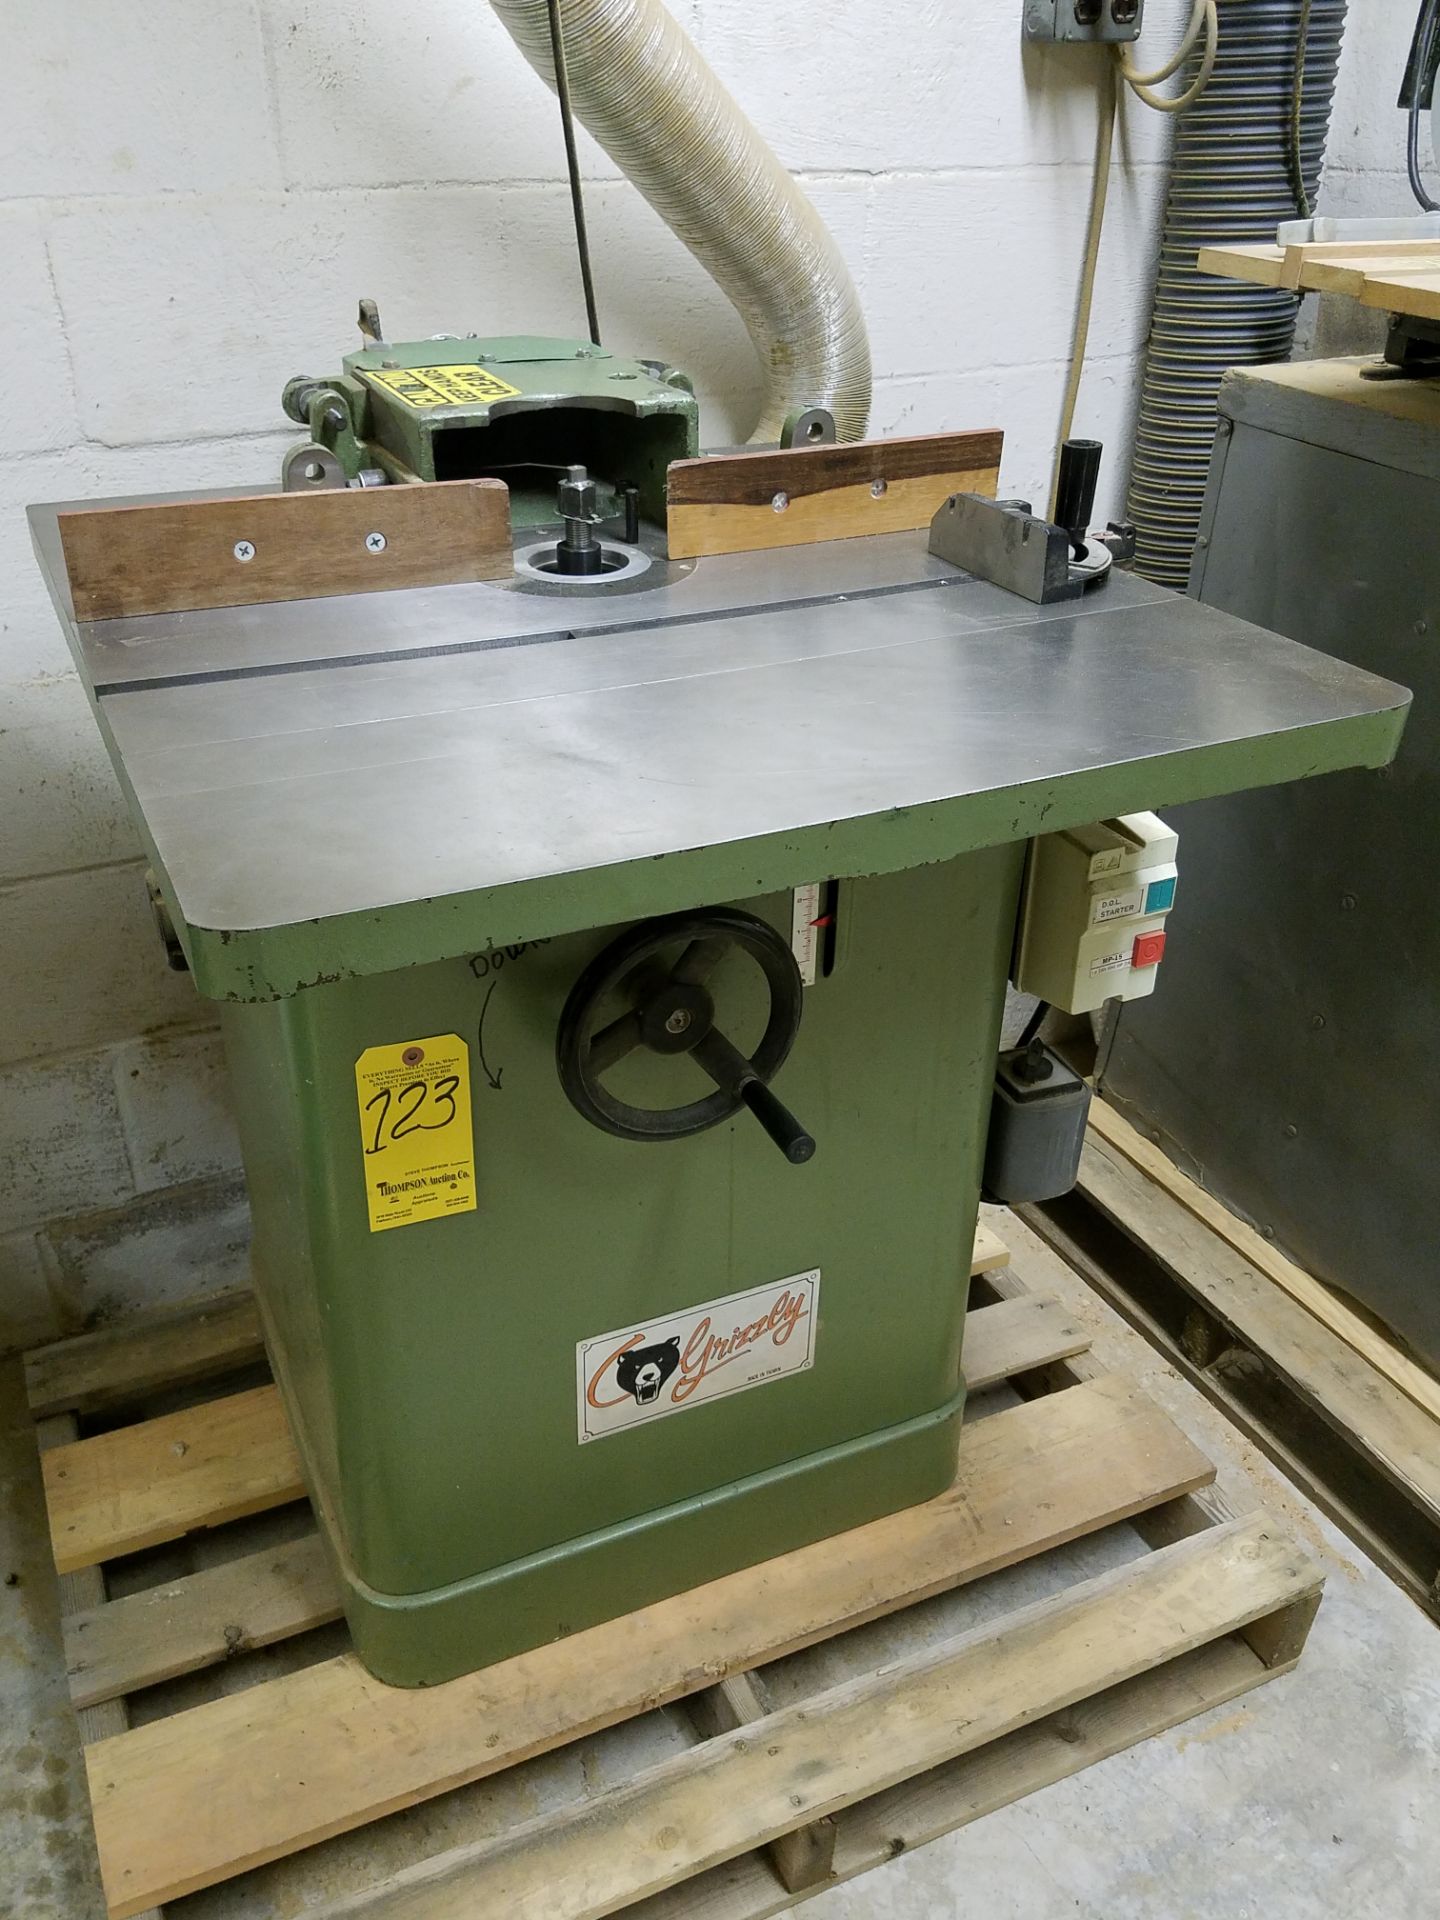 Grizzley Model G1026 Shaper, 3 HP, (3) Spindle Ranges, 7,000 RPM, Loading Fee $50.00